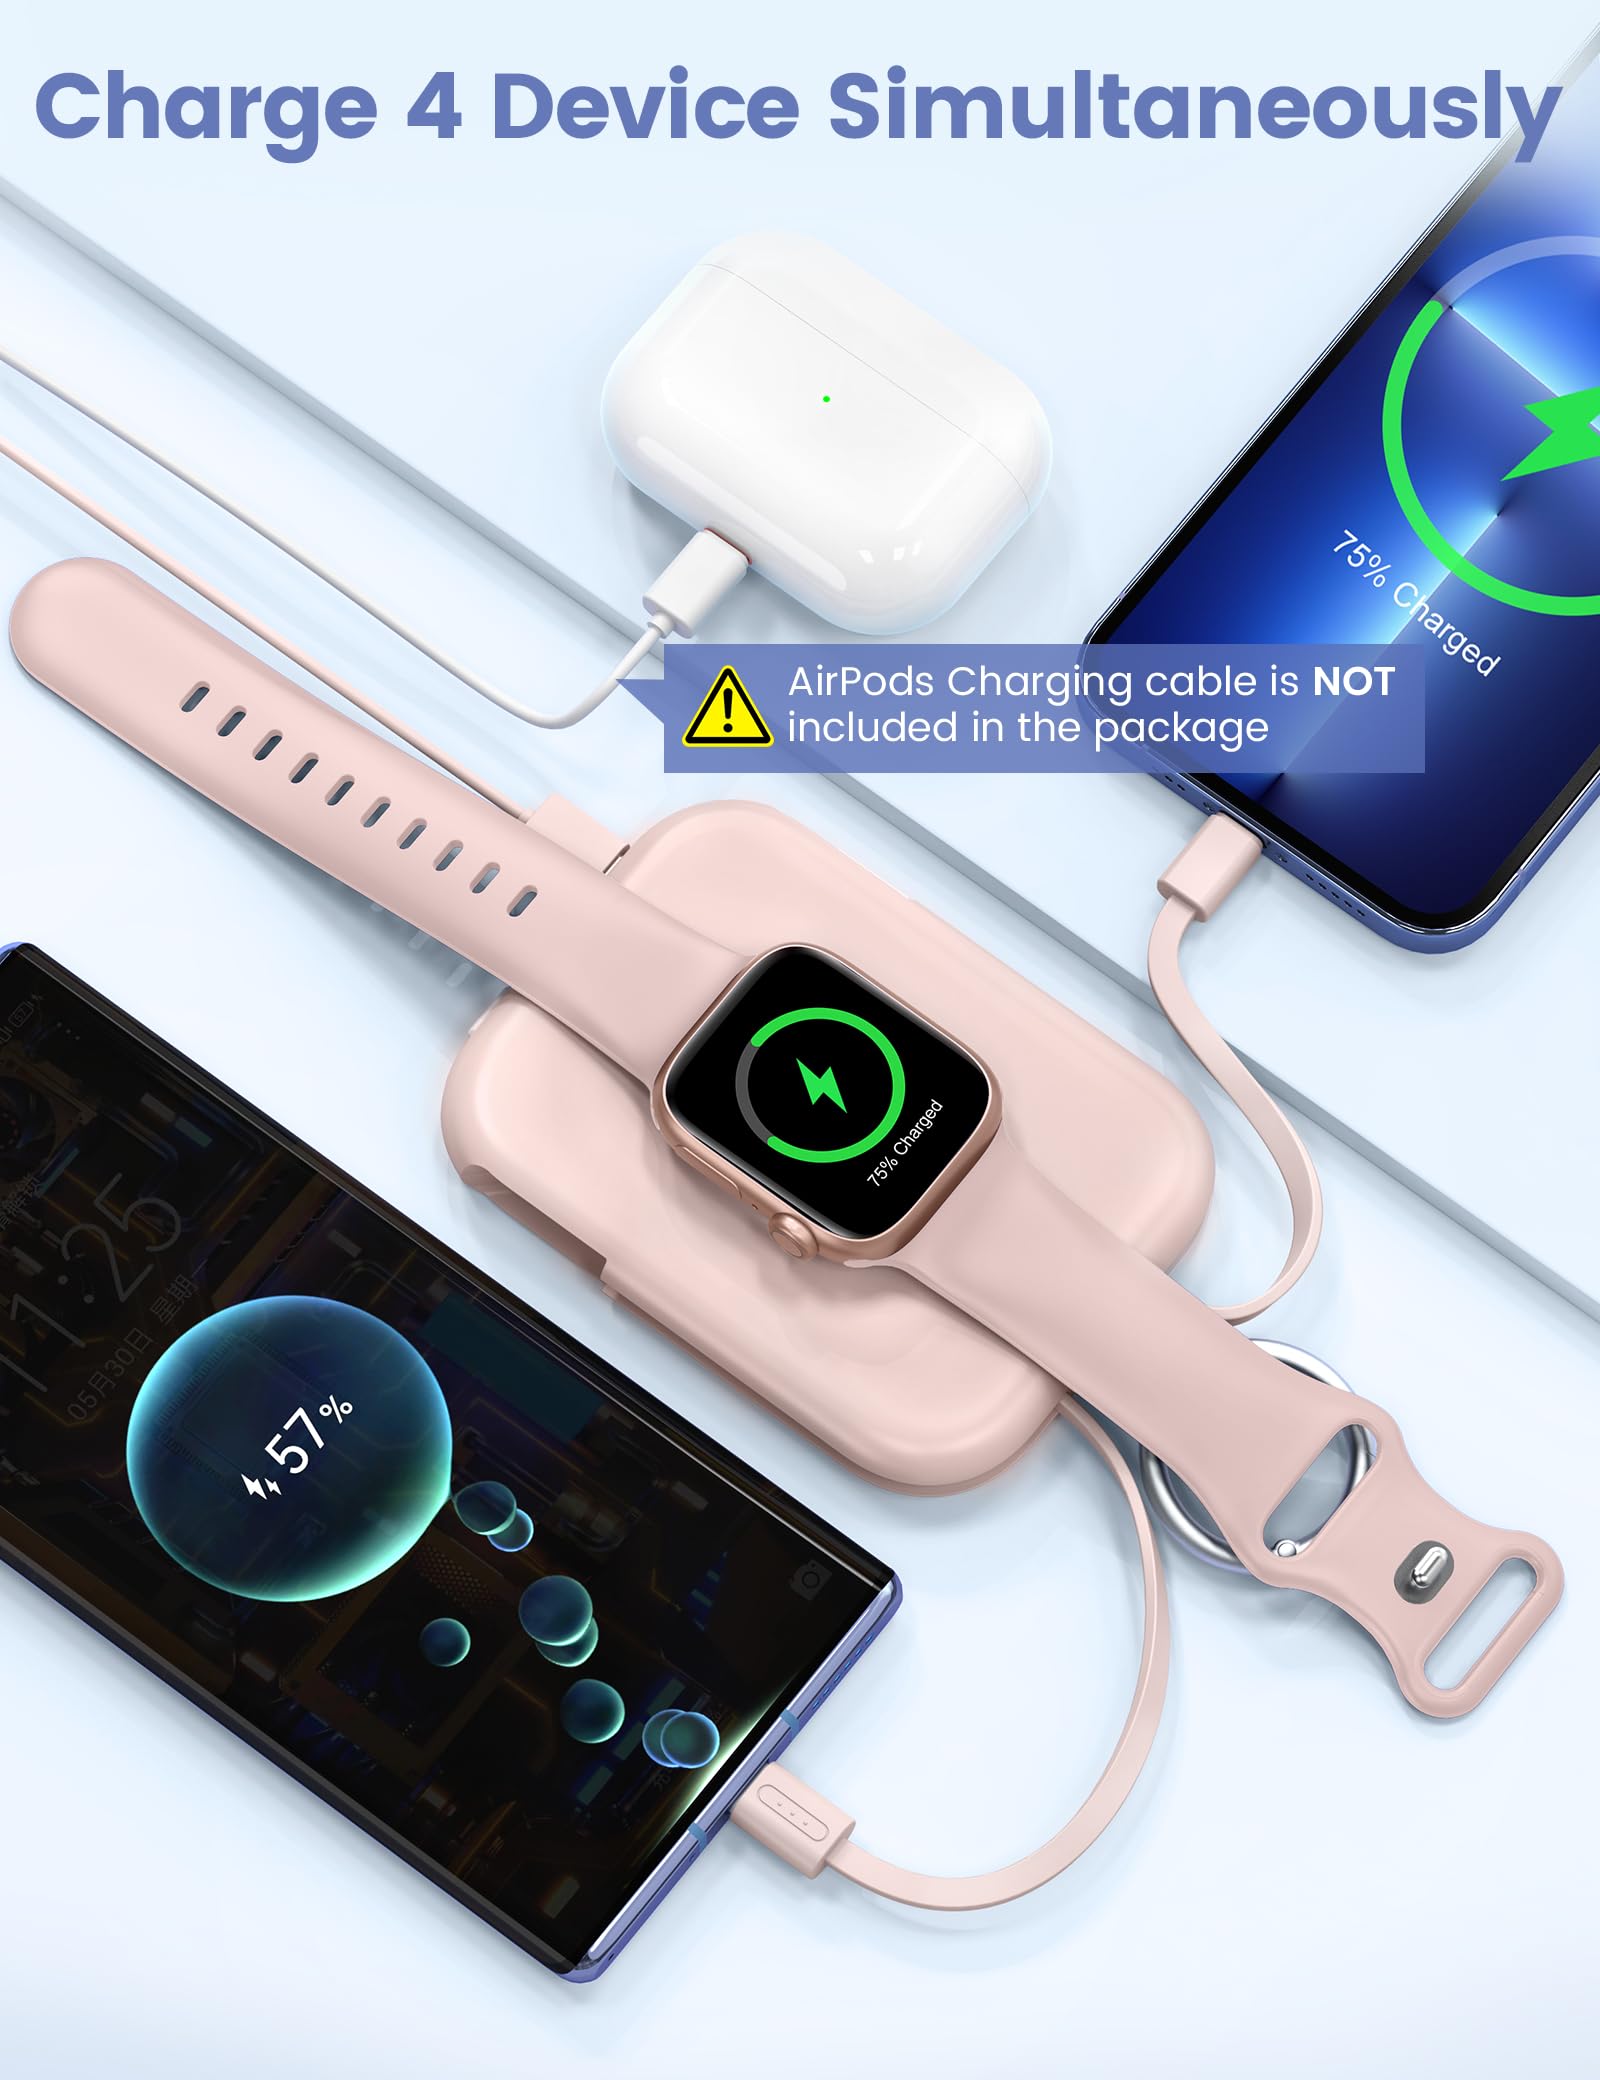 RORRY Portable Apple Watch Charger,5000mAh iWatch Wireless Charger Power Bank with Built-in Cable,Travel Keychain Charger for Apple Watch 9/Ultra2/8/Ultra/7/6/Se/5/4/3,iPhone 15/14/13/12/11 (Pink)